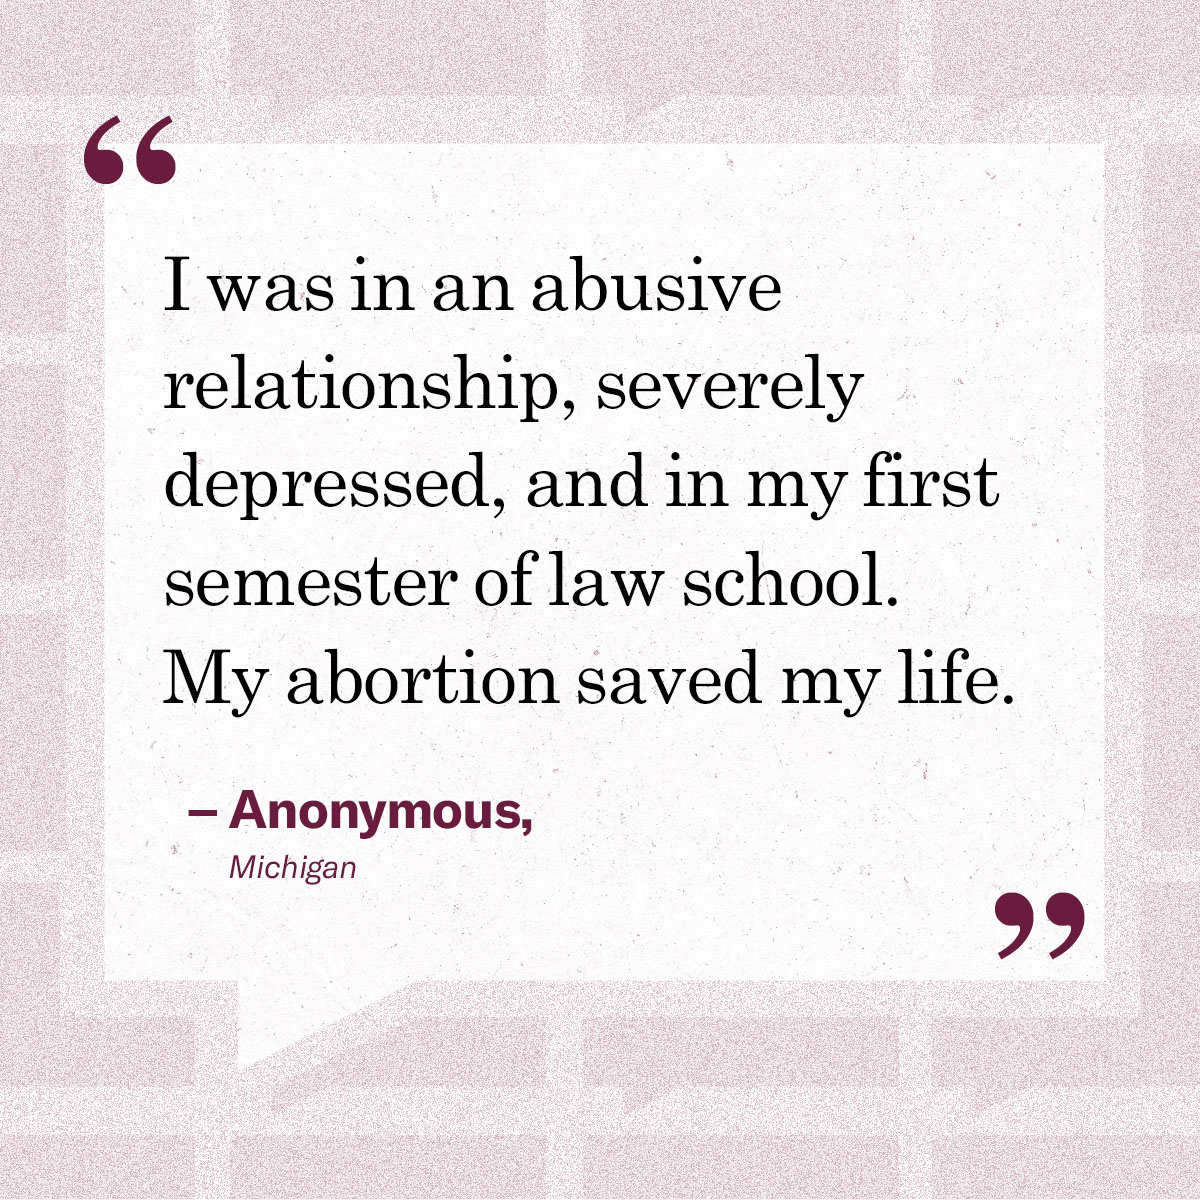 “I was in an abusive relationship, severely depressed, and in my first semester of law school. My abortion saved my life.” – Anonymous, Michigan